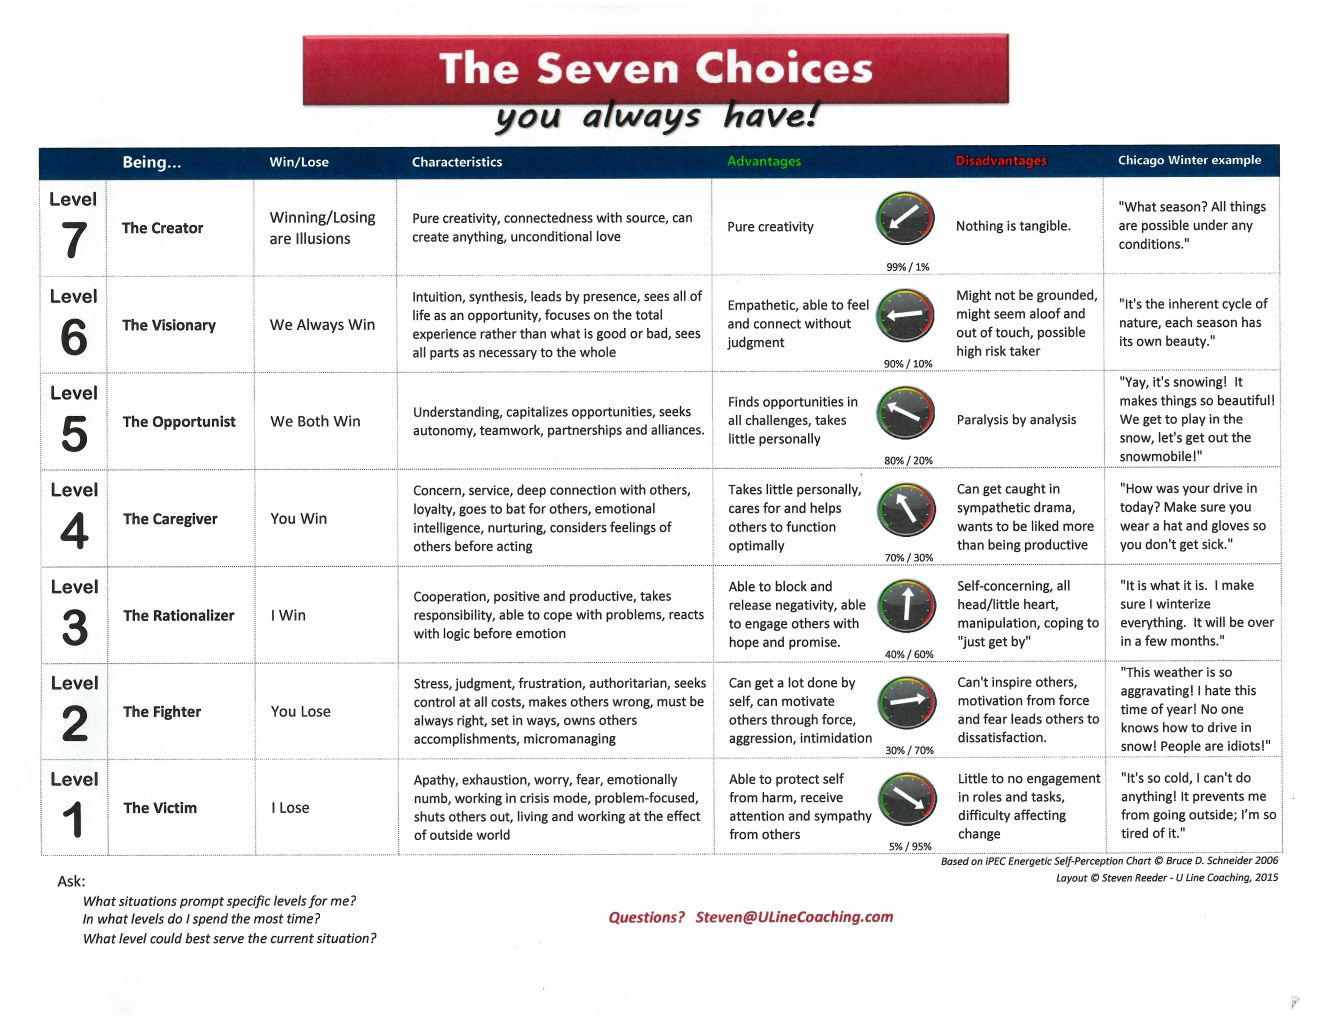 The Seven Choices You Always Have web